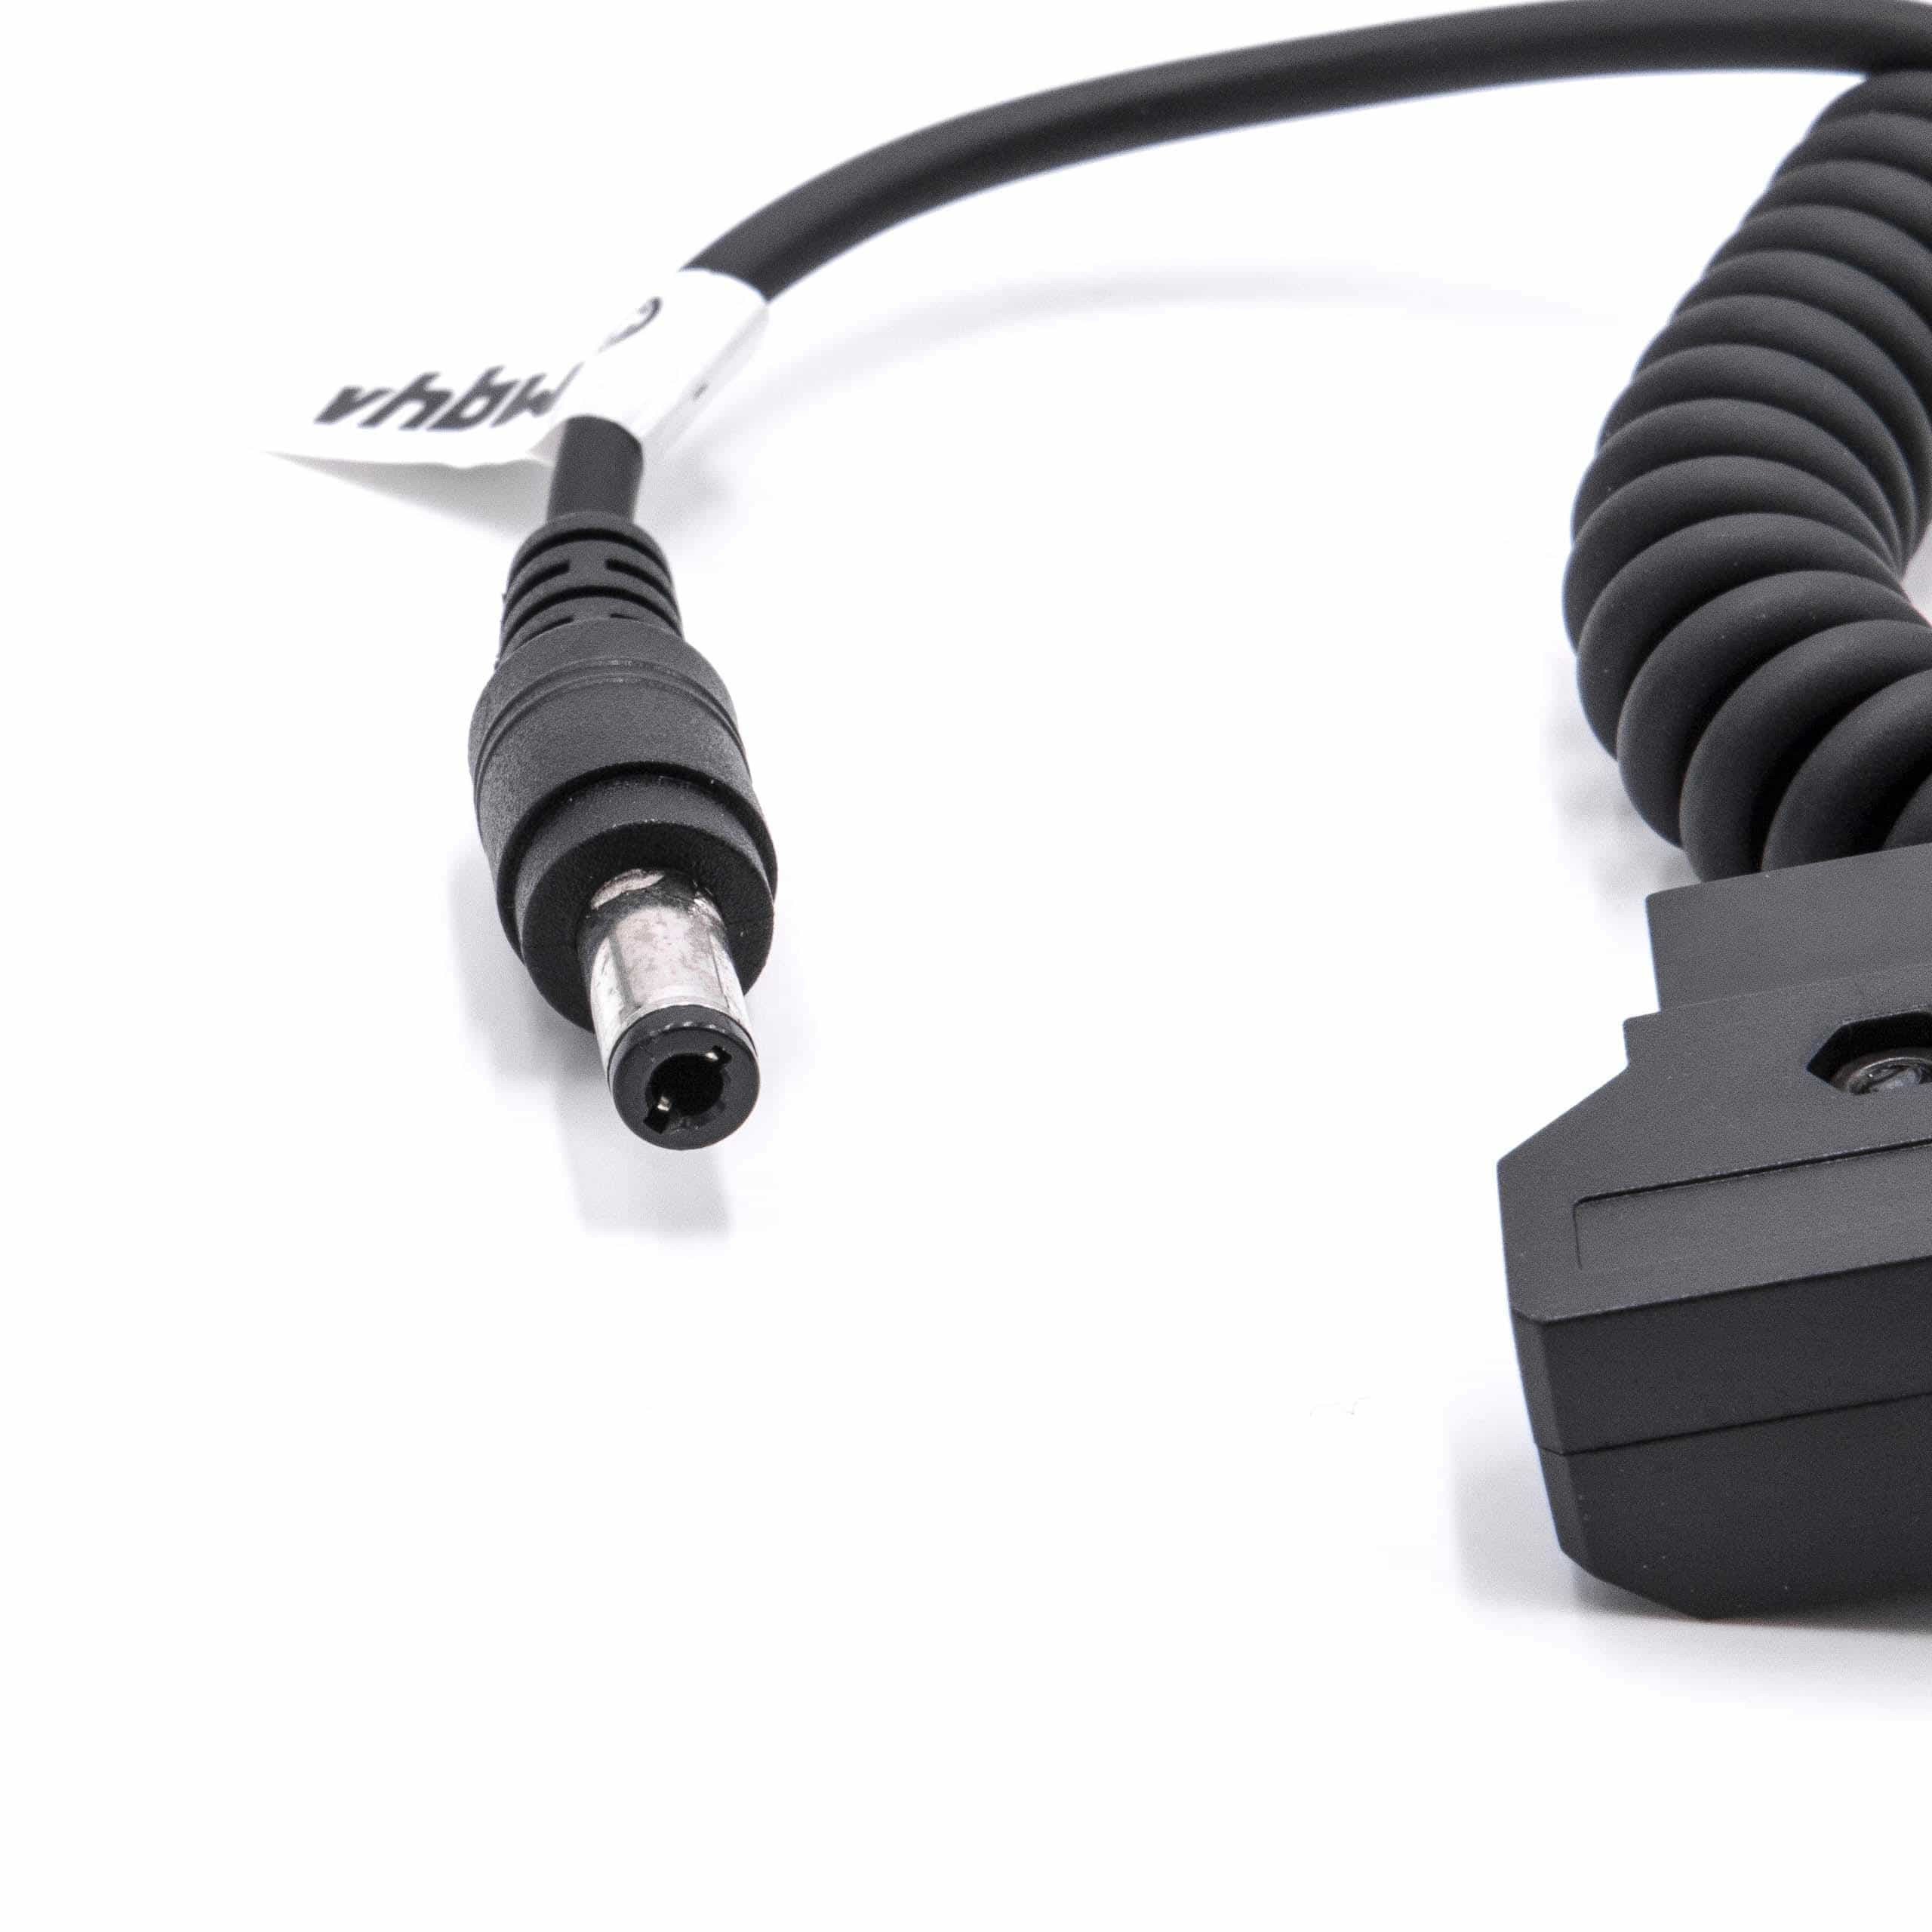 Adapter Cable D-Tap (male) to LED Power Supply suitable for Anton Bauer Dionic, D-Tap Camera - Black